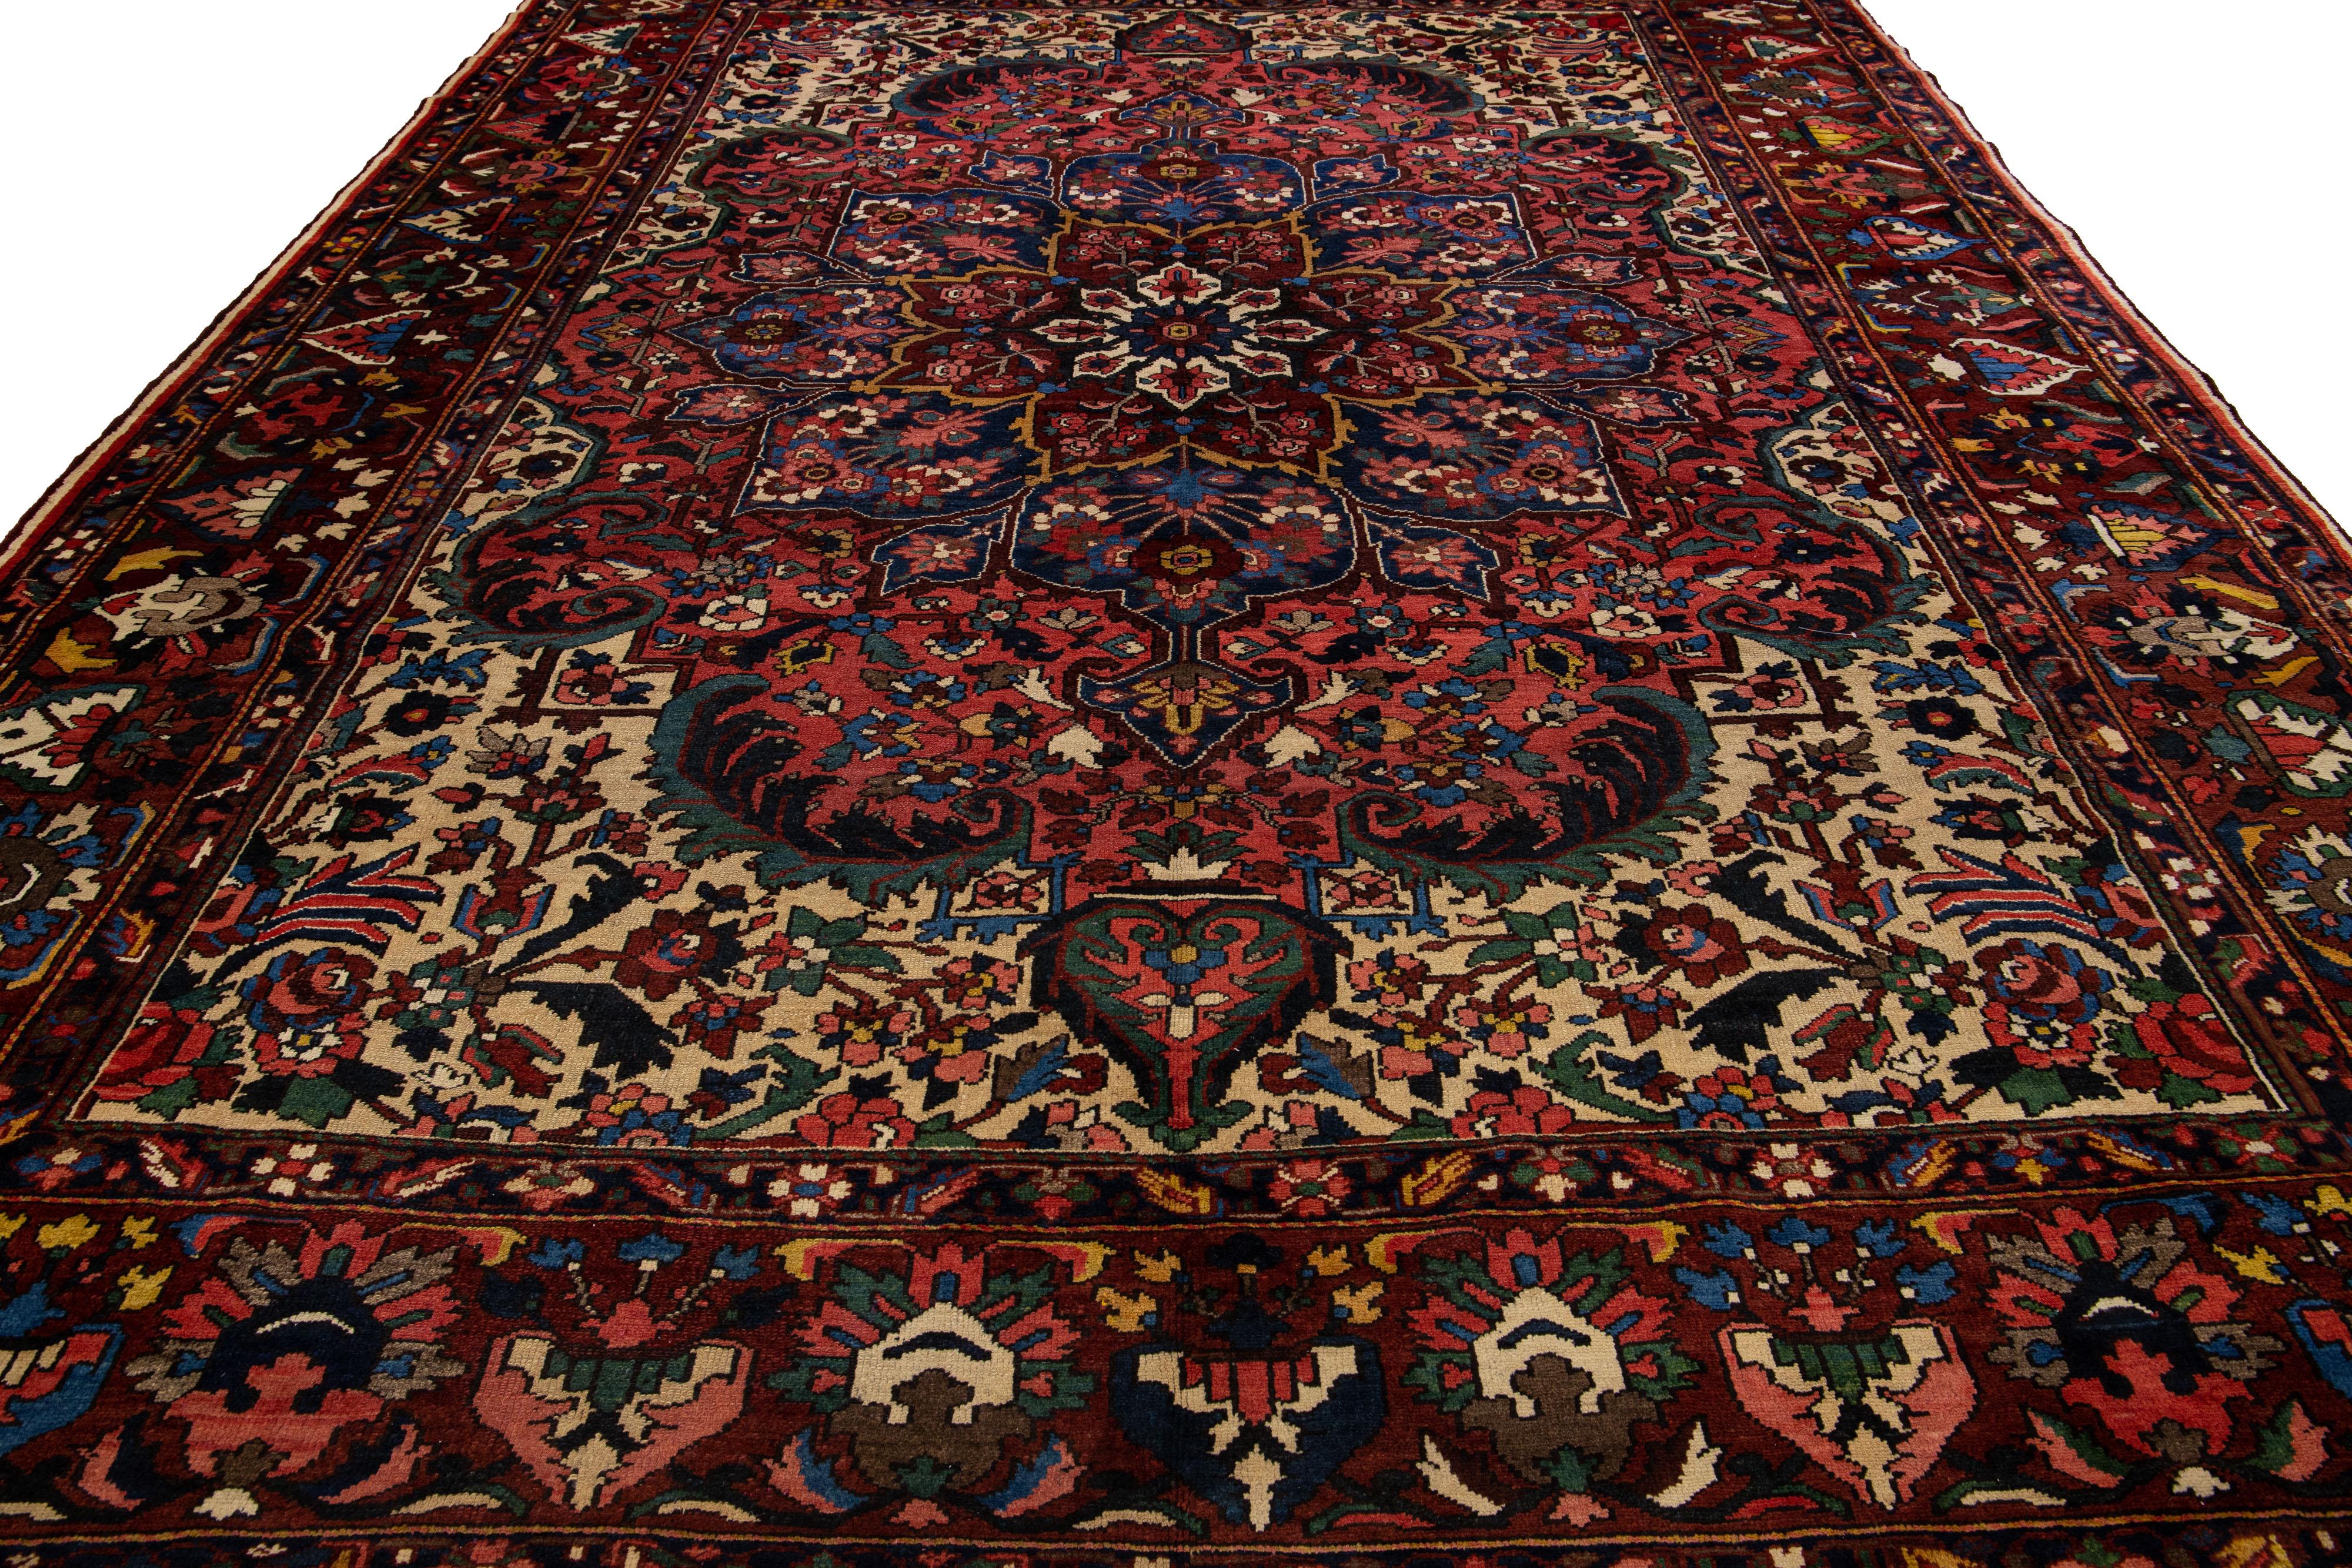 Beautiful Antique Bakhtiari hand-knotted wool rug with a red field. This Persian piece has an all-over multicolor accent in a gorgeous classic rosette design.

This rug measures 10'9